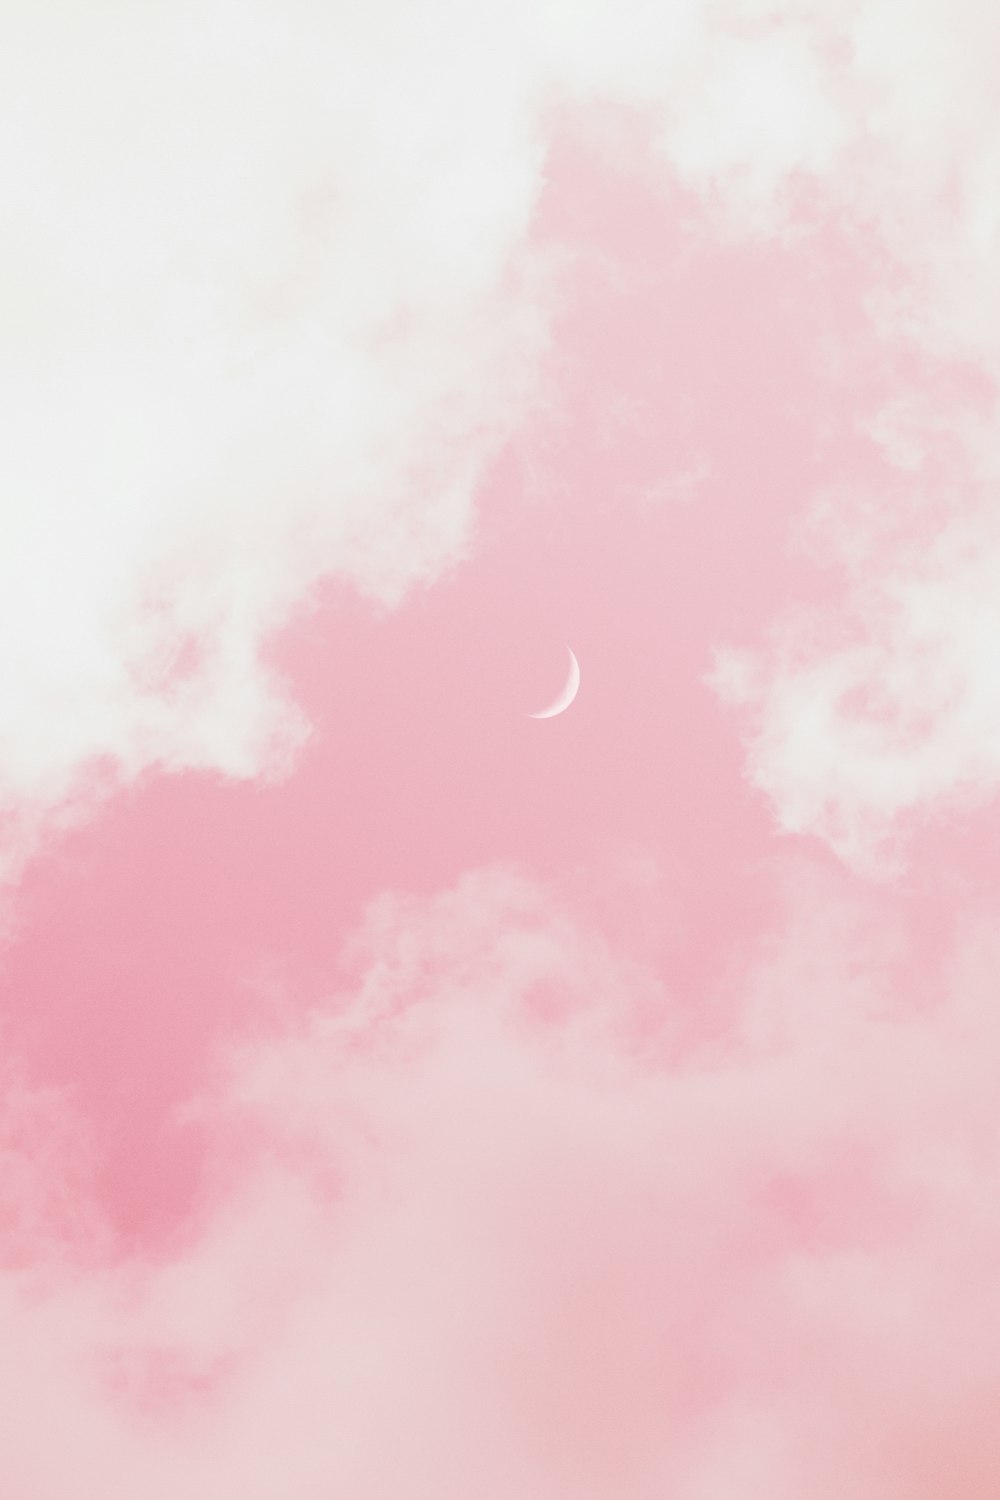 crescent moon in the sky